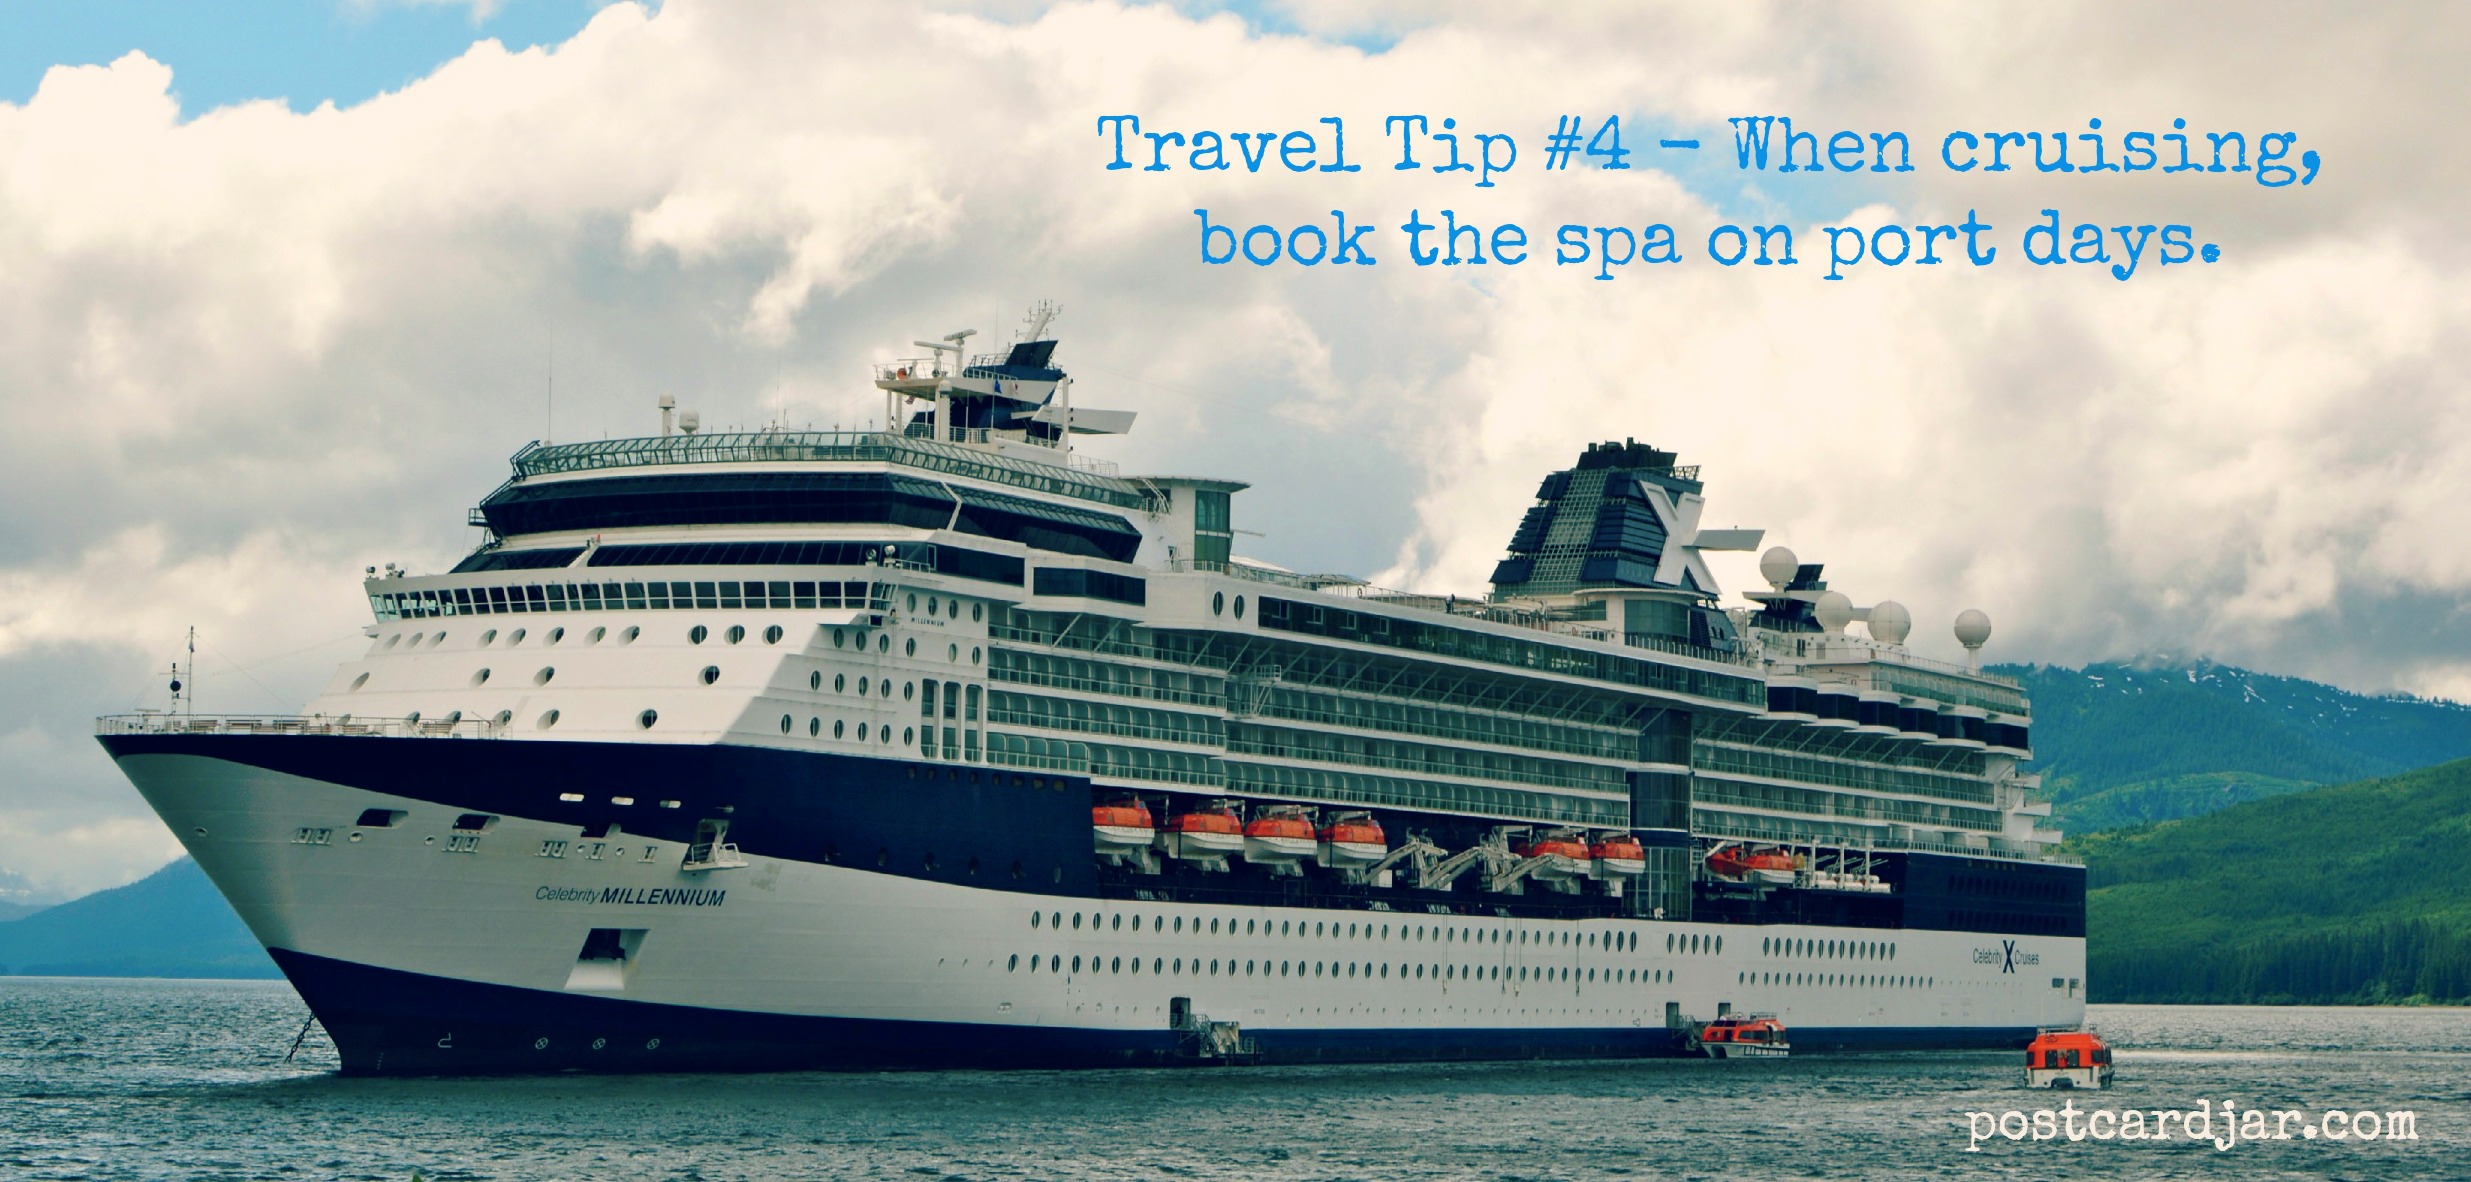 Travel Tip #4 – When cruising, book the spa on port days.